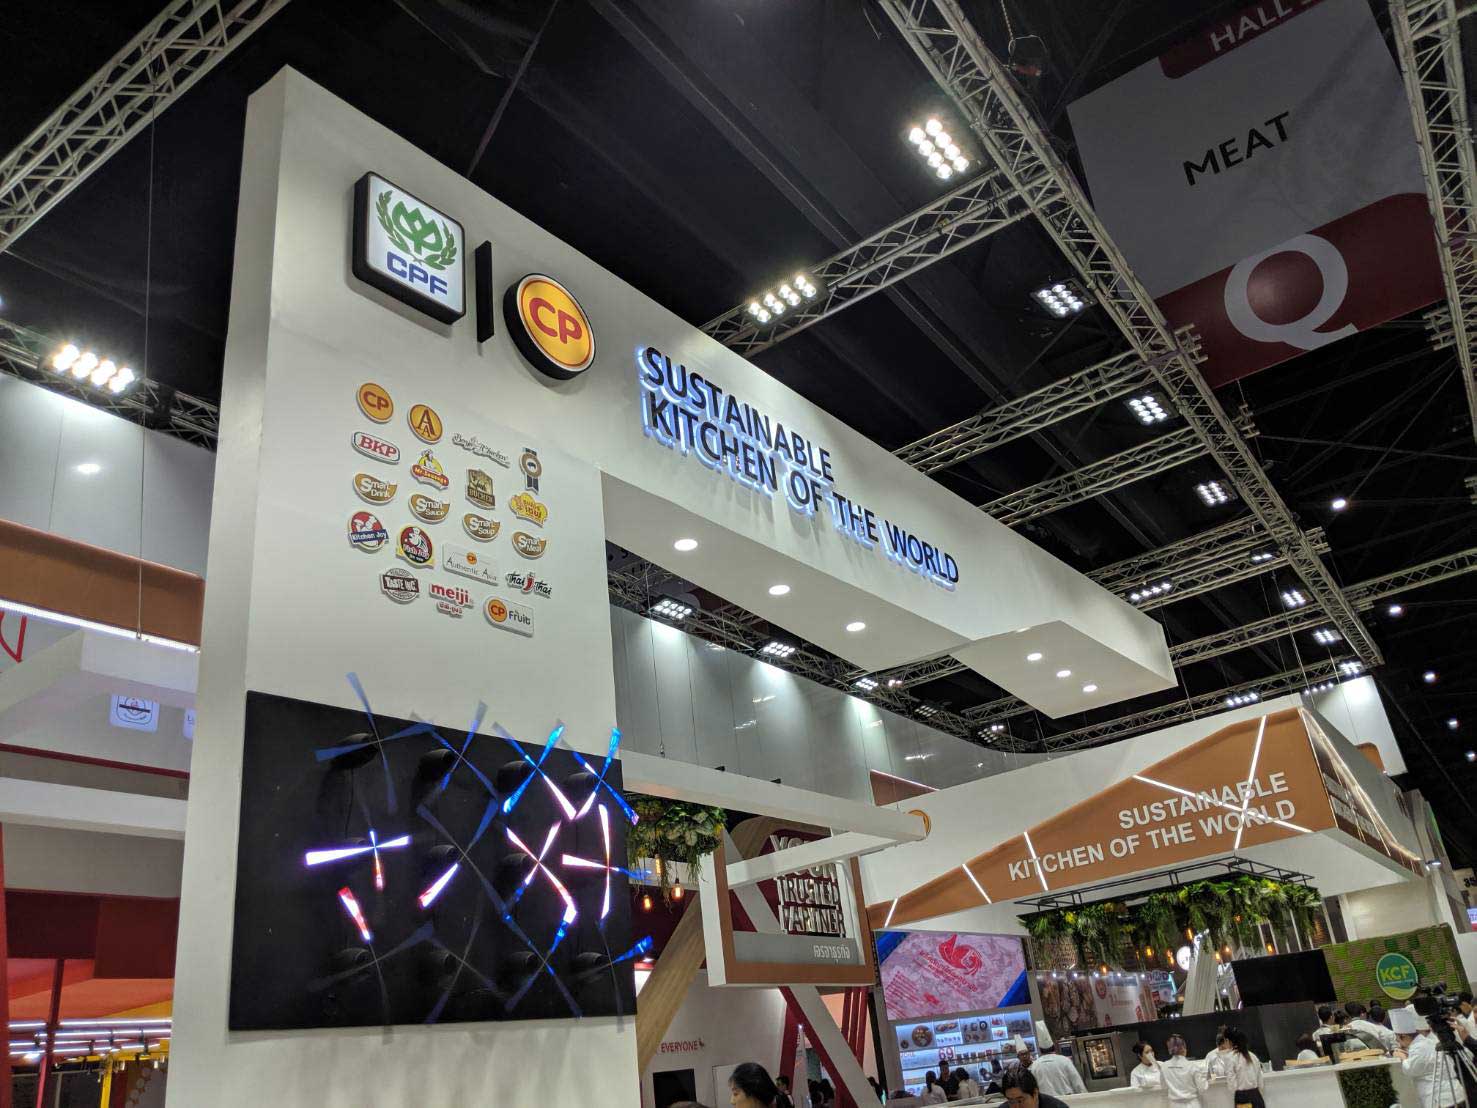 CP Foods showcases “Sustainable Kitchen of the World” at THAIFEX 2019